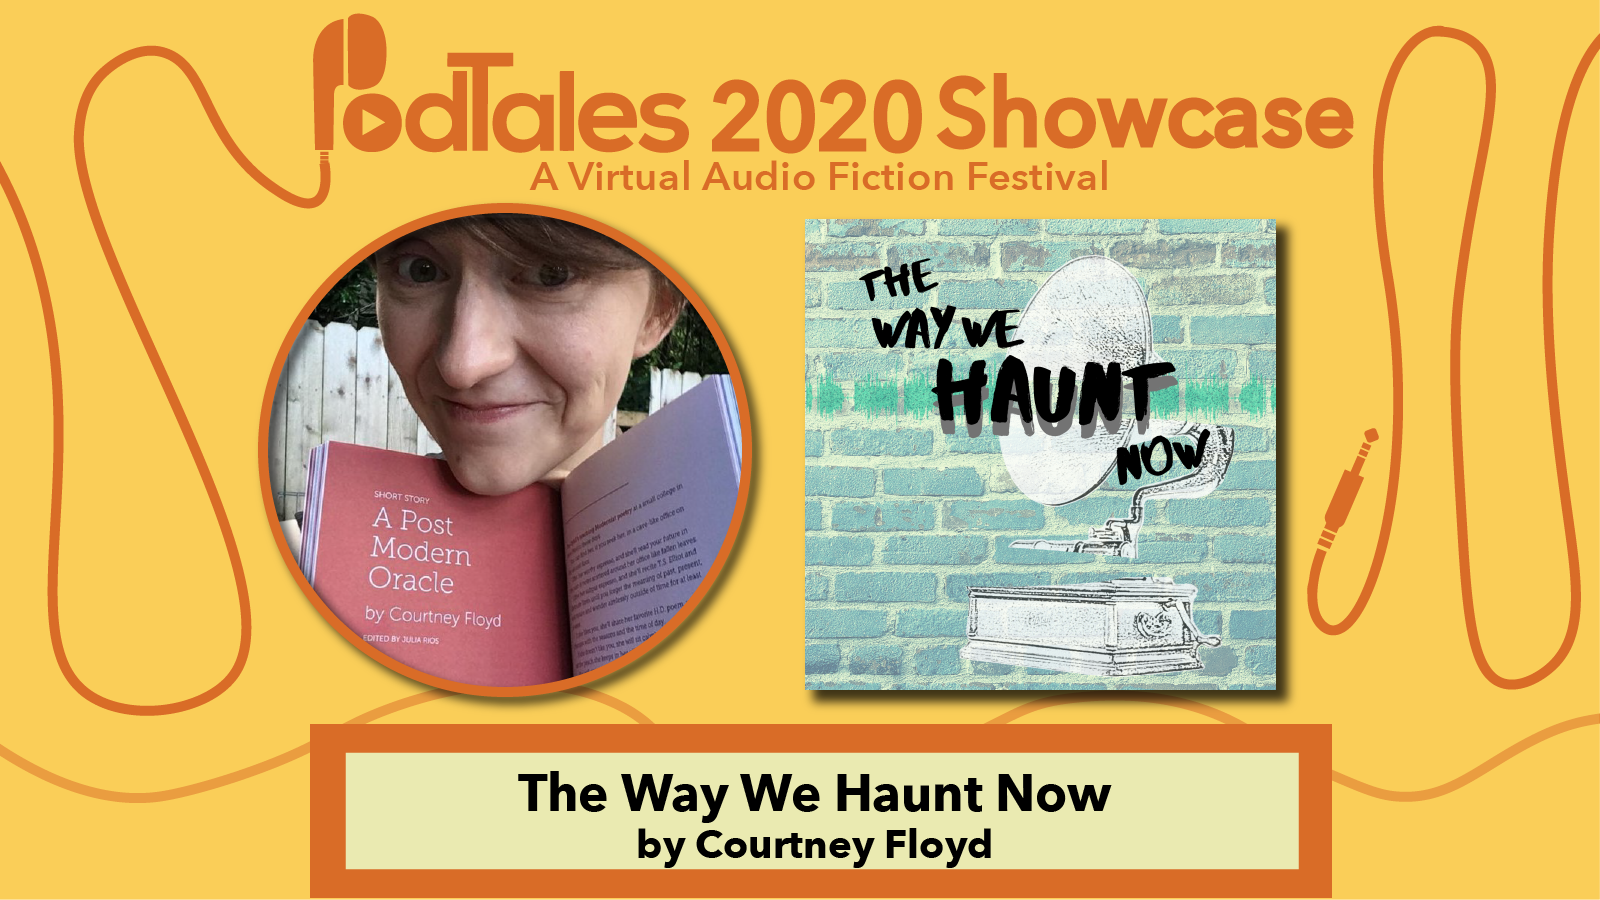 Text reading “PodTales 2020 Showcase: A Virtual Audio Fiction Festival”, Photo of Courtney Floyd, Show Art for The Way We Haunt Now, Text reading “The Way We Haunt Now by Courtney Floyd”